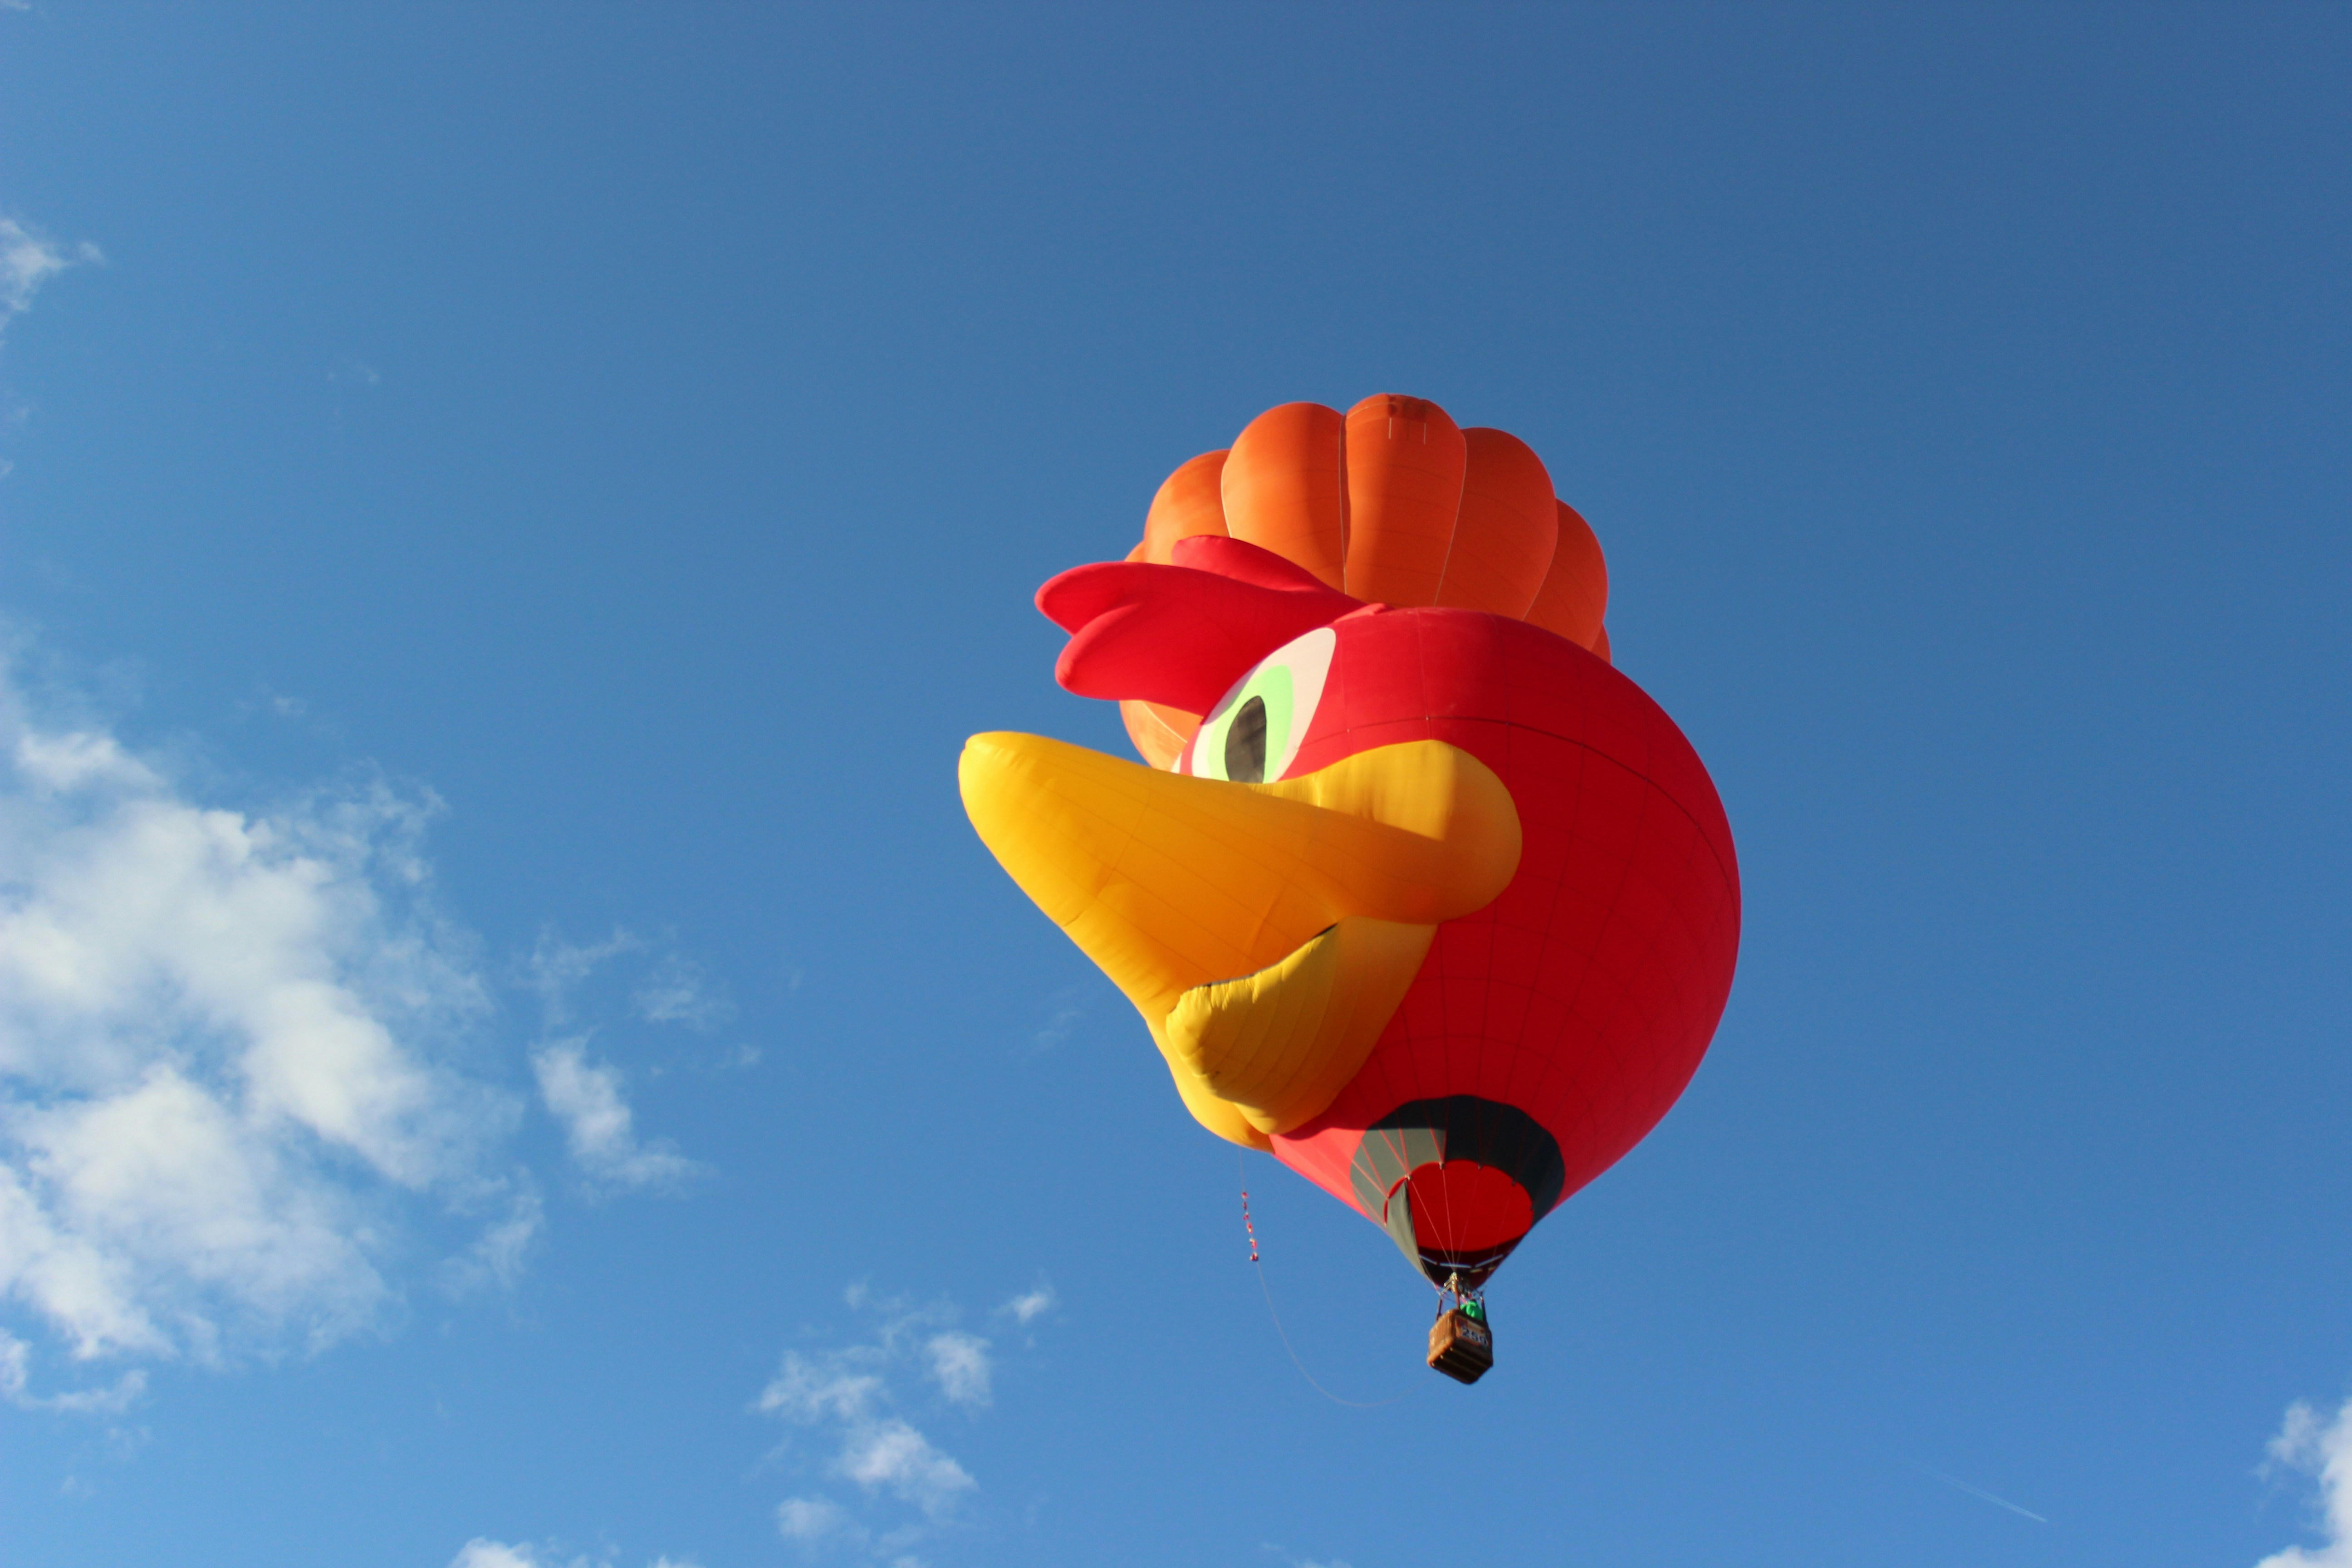 Balloon Fiest, a hot air balloon festival that takes place in Albuquerque, New Mexico, during early October. The Balloon Fiesta is a nine-day event occurring in the first full week of October, and has over 500 hot air balloons each year.